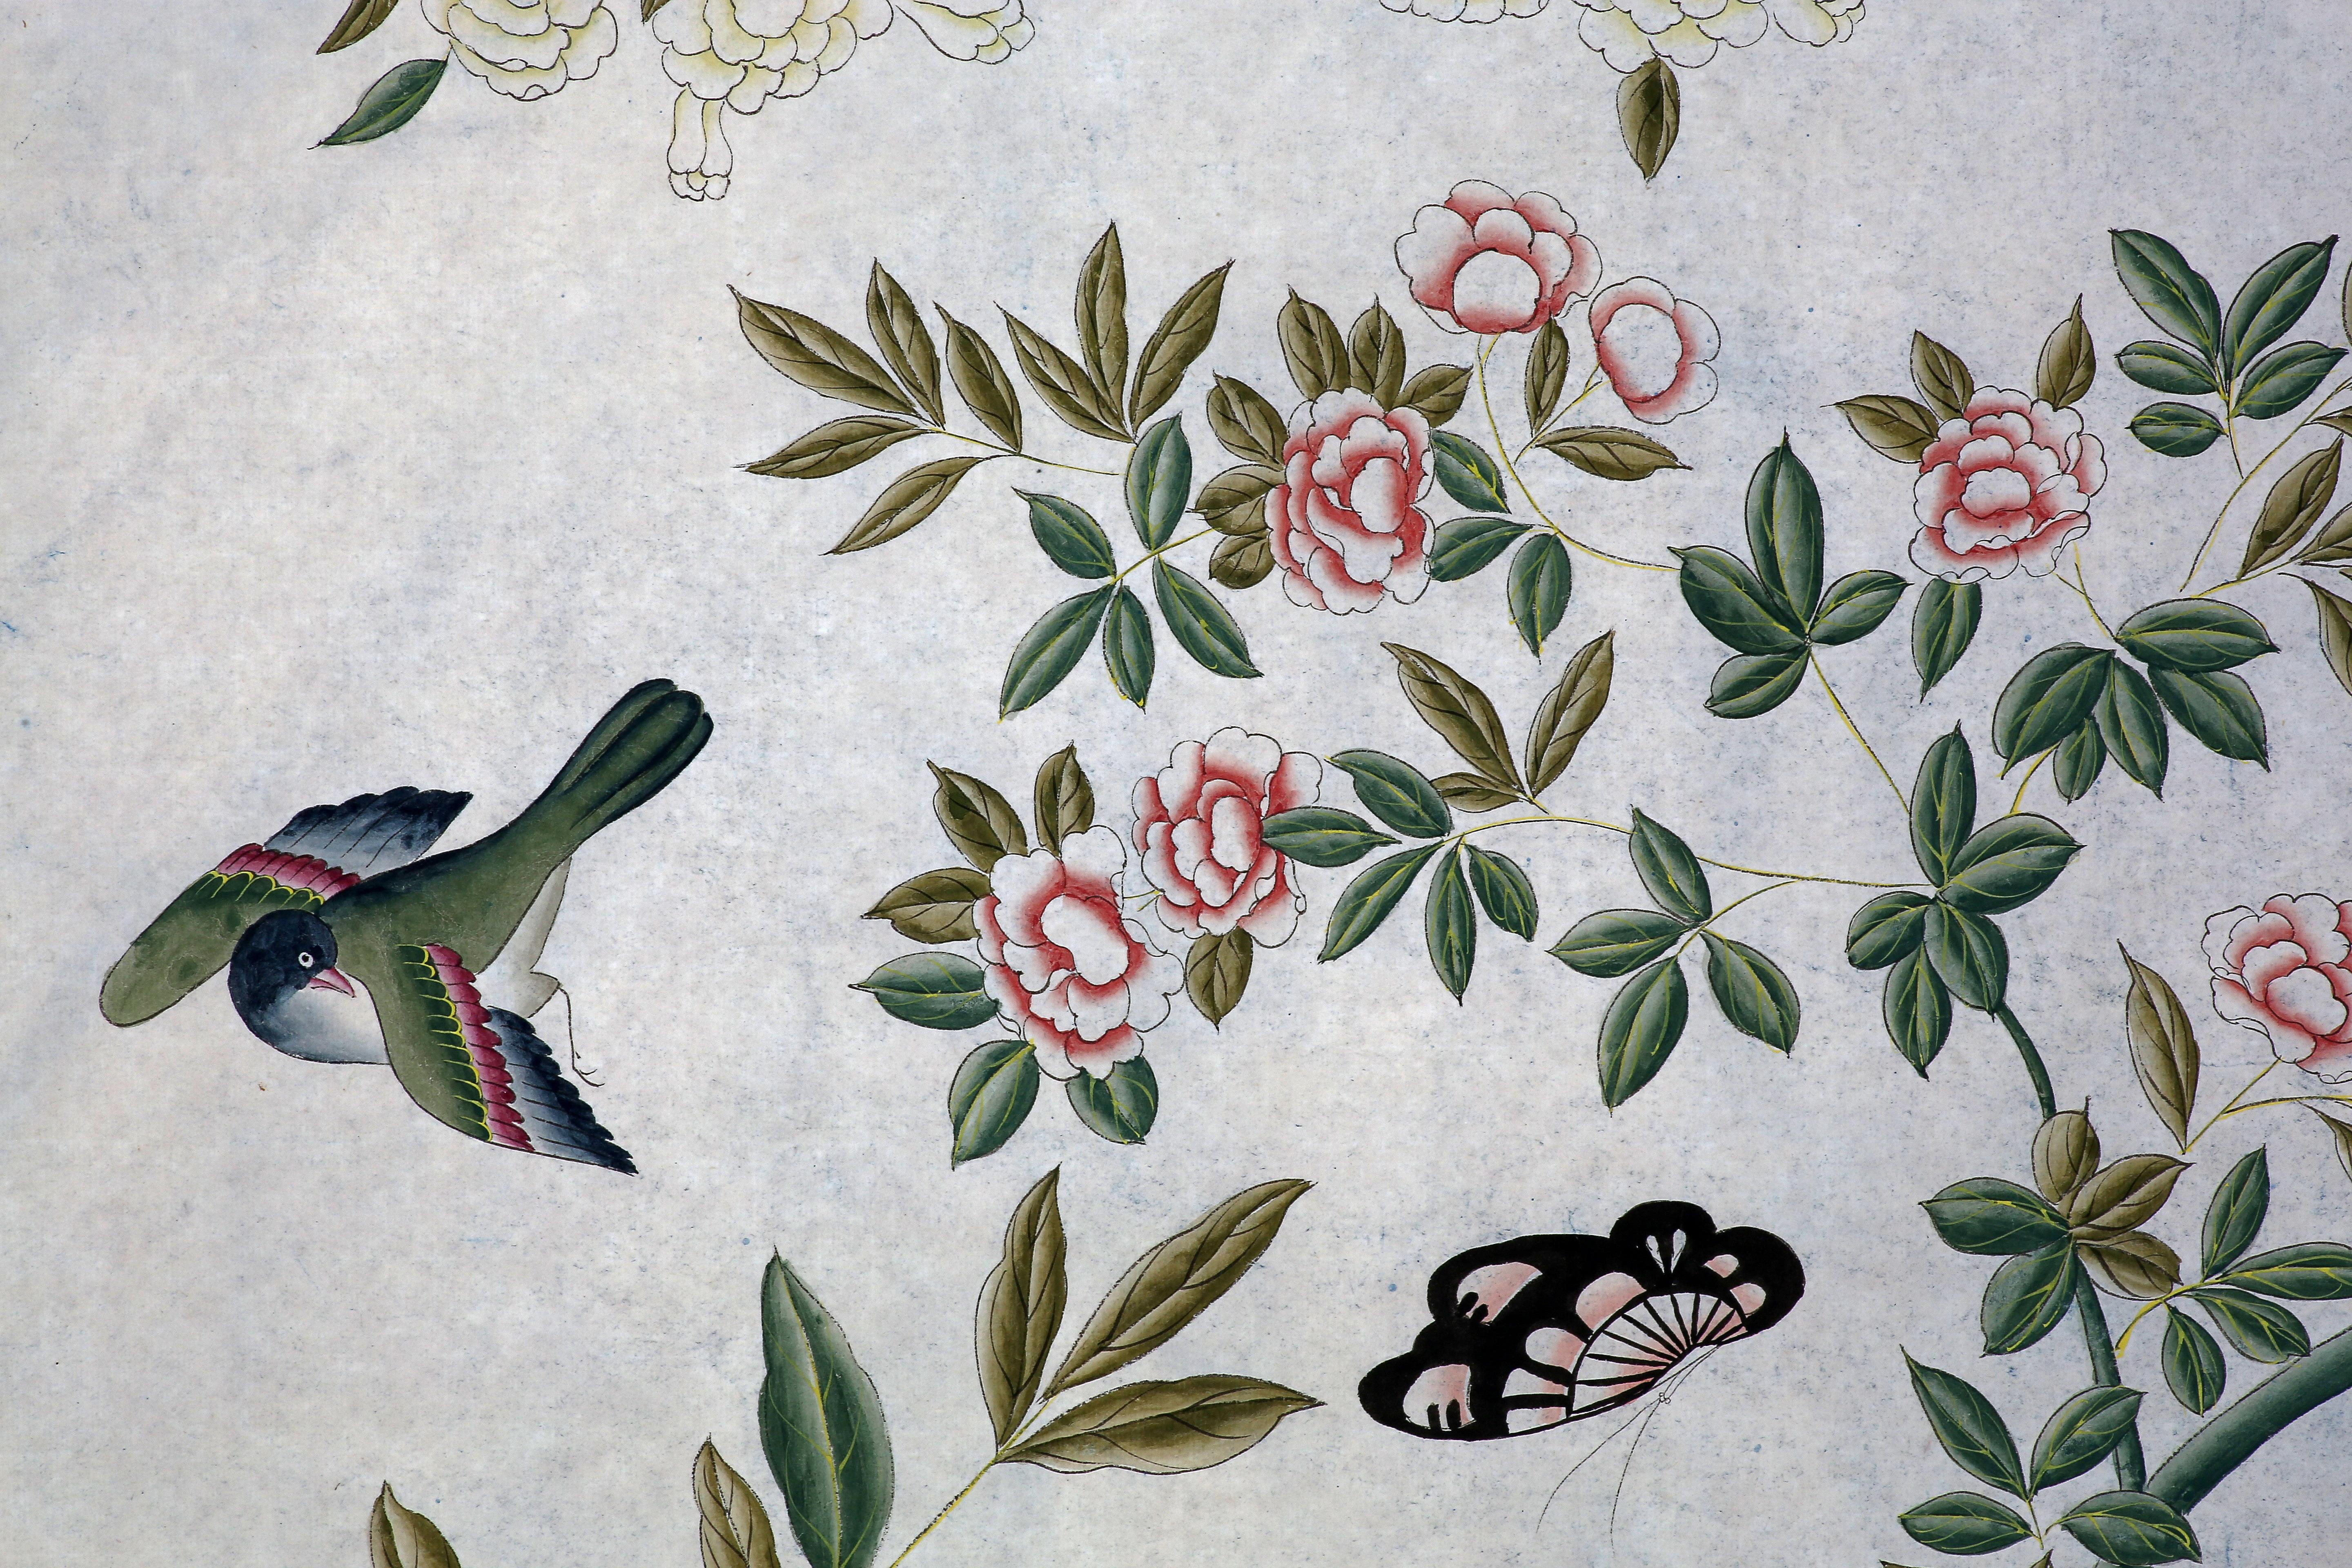 Chinoiserie Hand Painted Wallpaper Panels of Birds in a Garden Setting 1